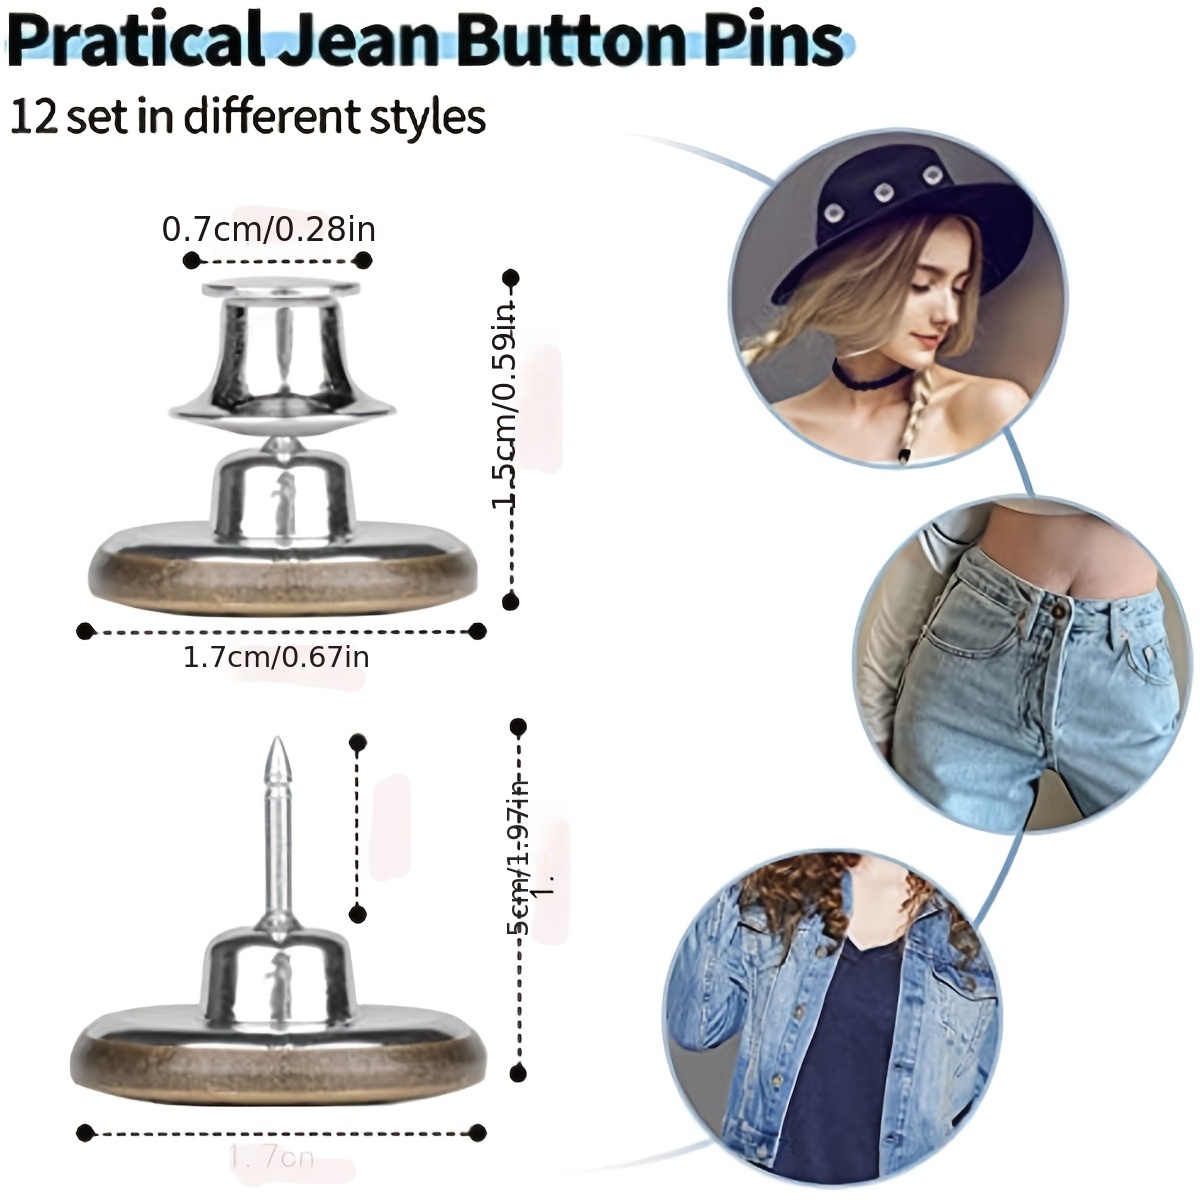 12 Sets Jean Buttons Pins for Jeans, No Sew Jean Buttons for Loose